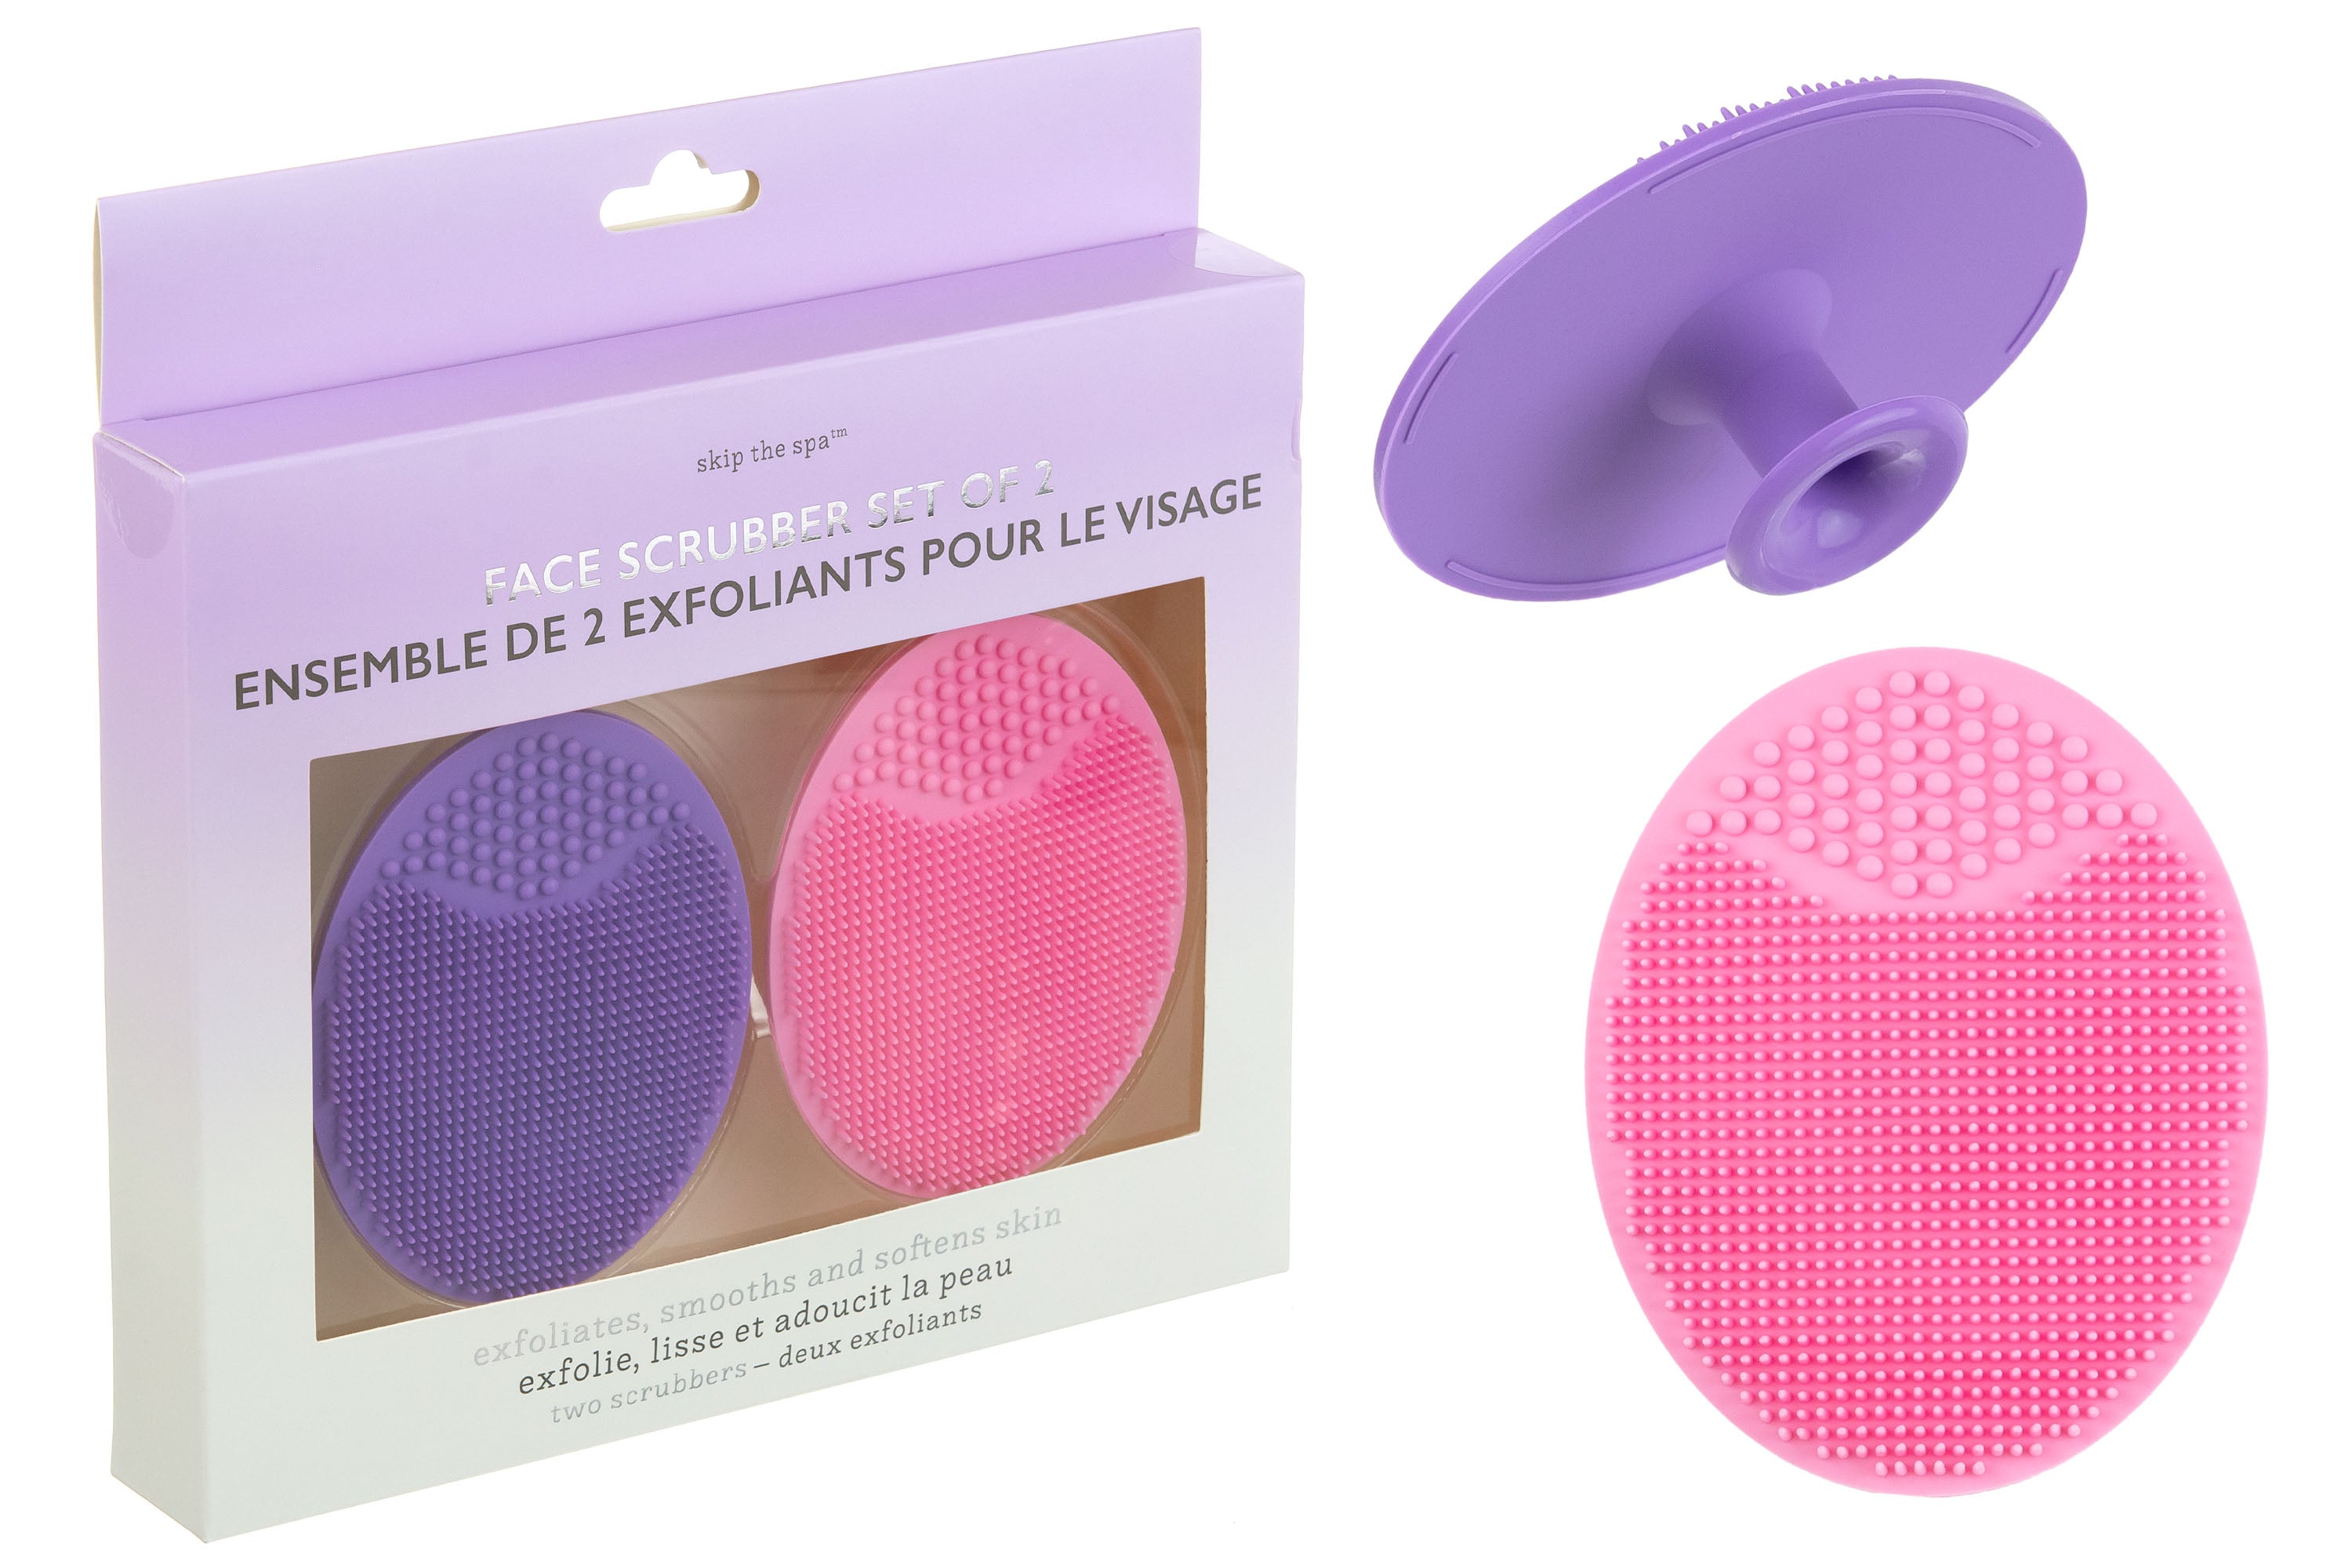 FACE SCRUBBER SET OF 2